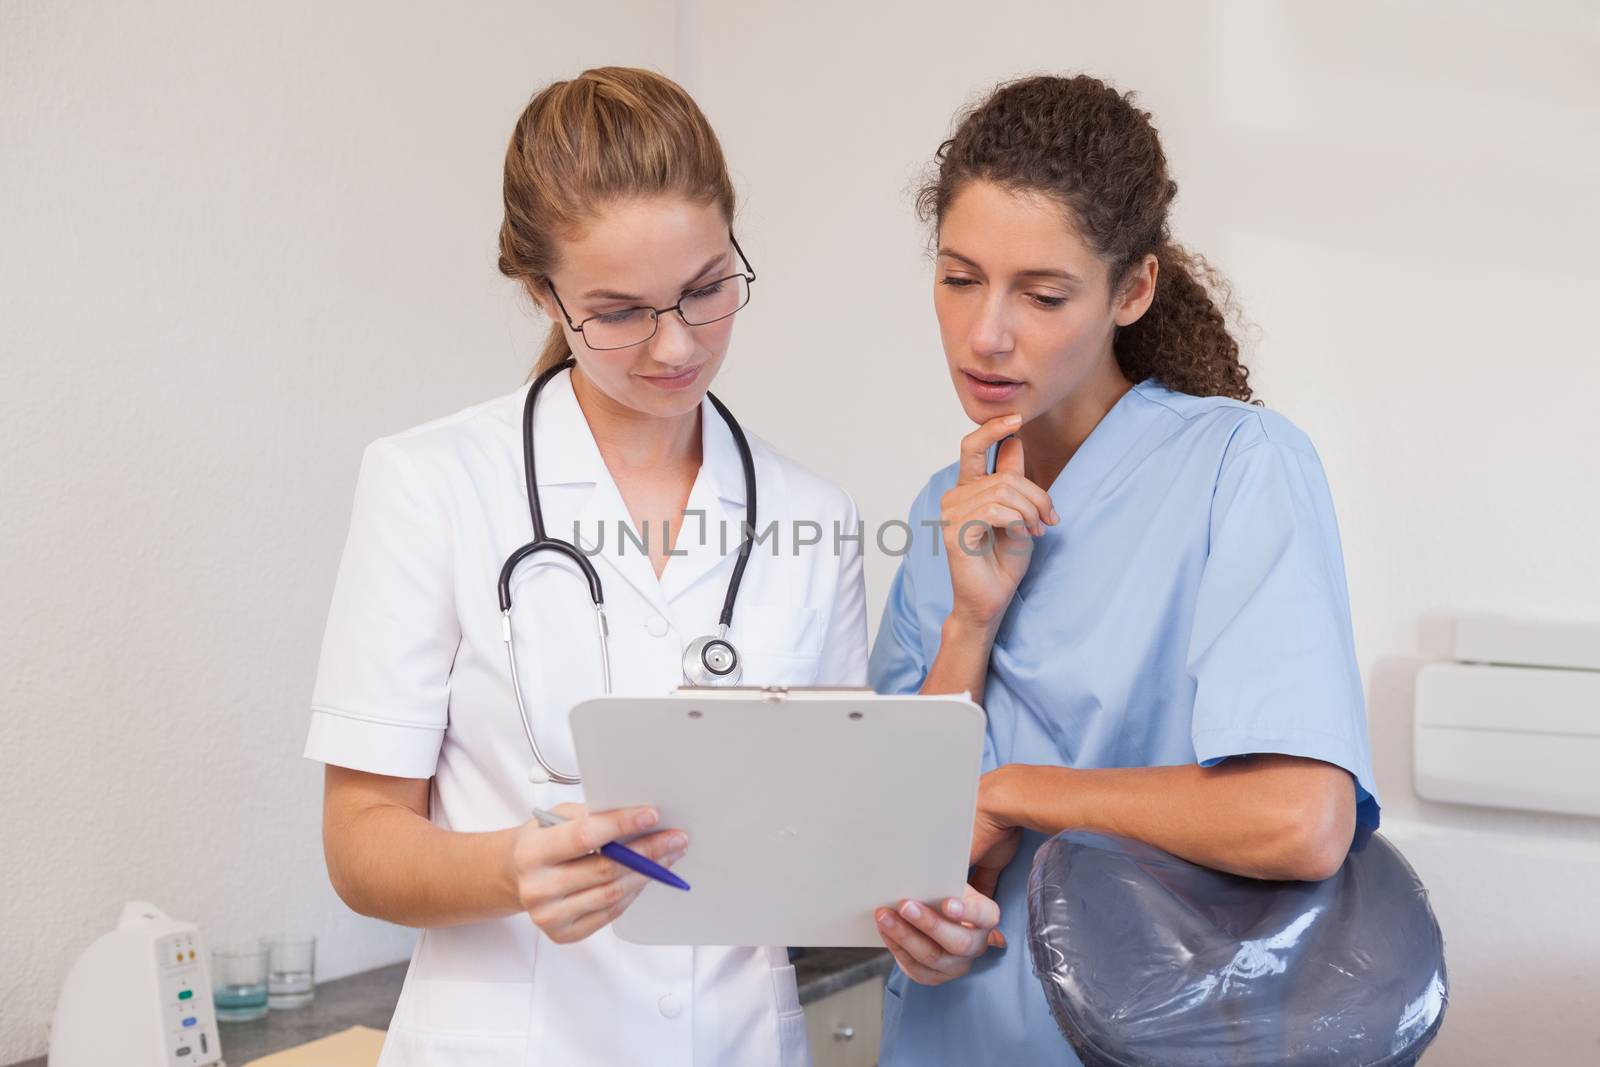 Dentist and dental assistant looking at clipboard at the dental clinic